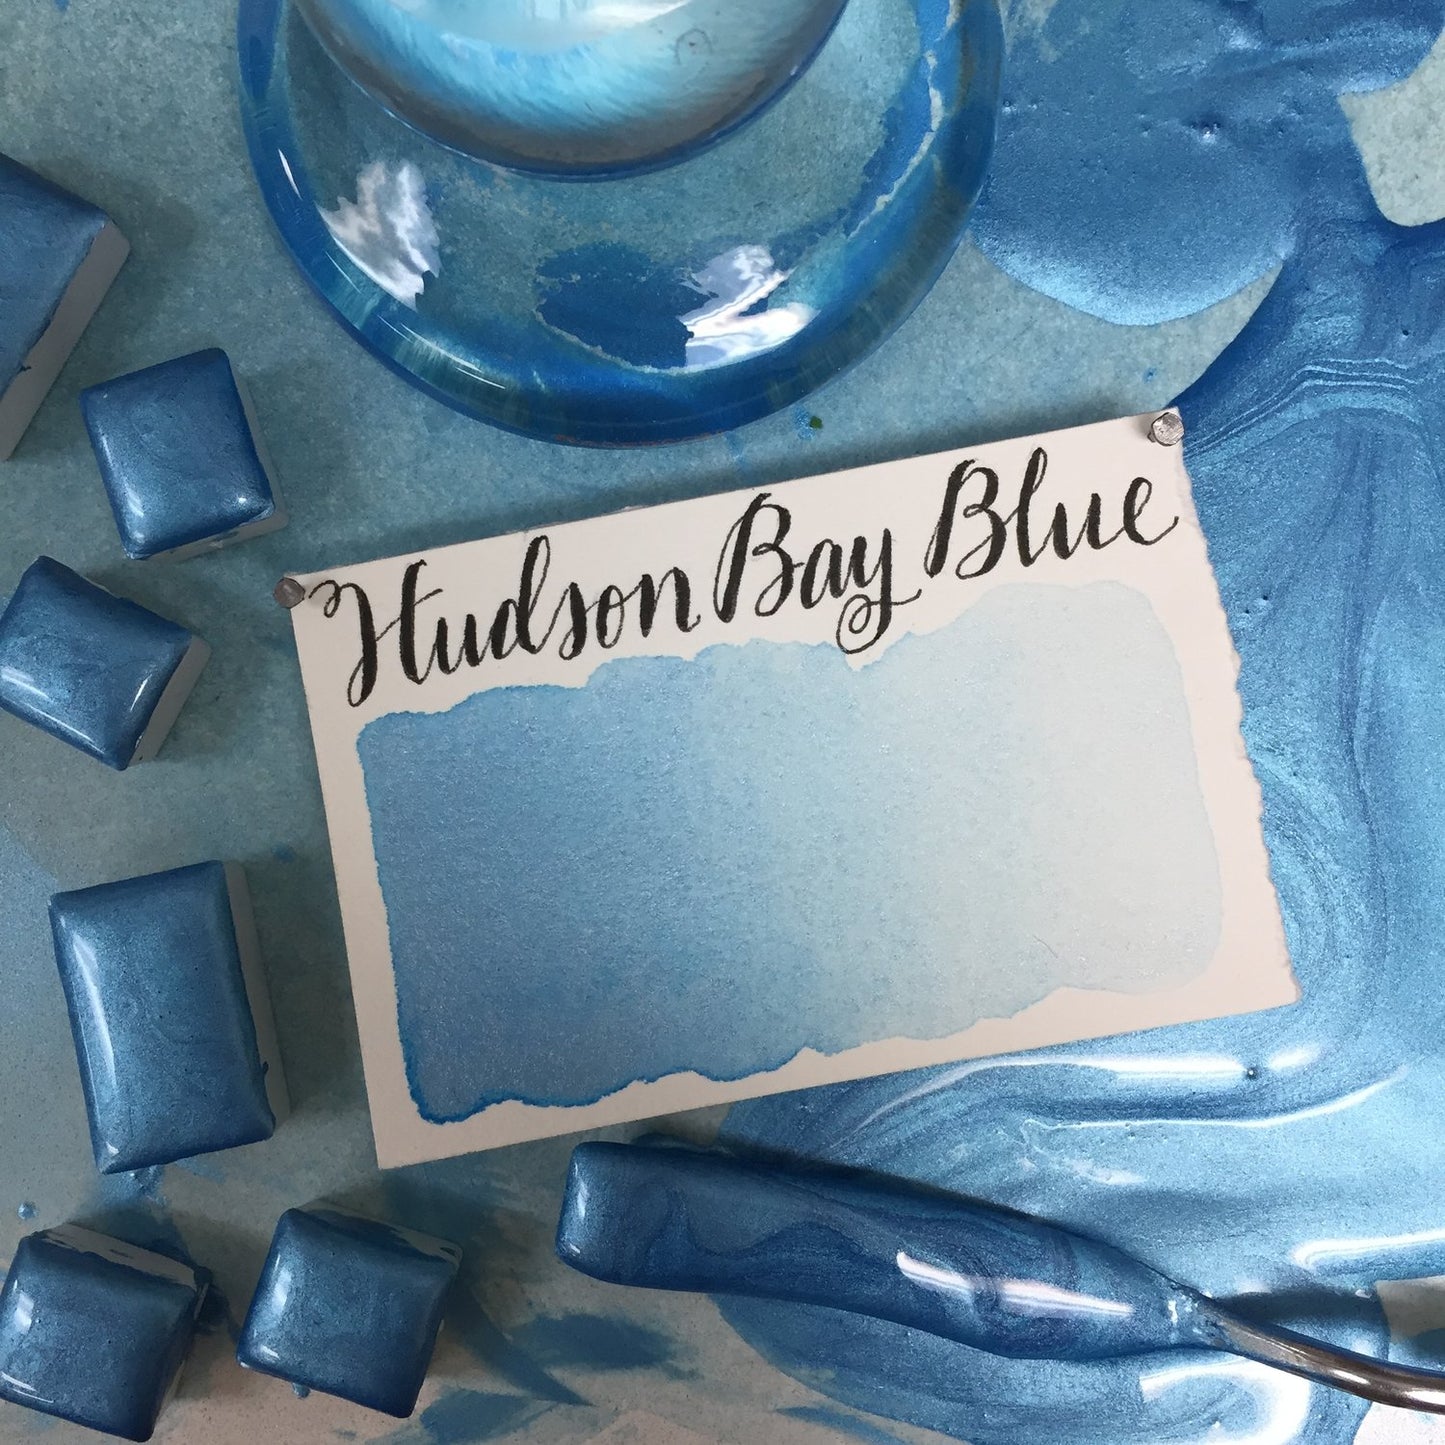 Stoneground - Hudson Bay Blue (Pearlescent Colour - Half Pan)